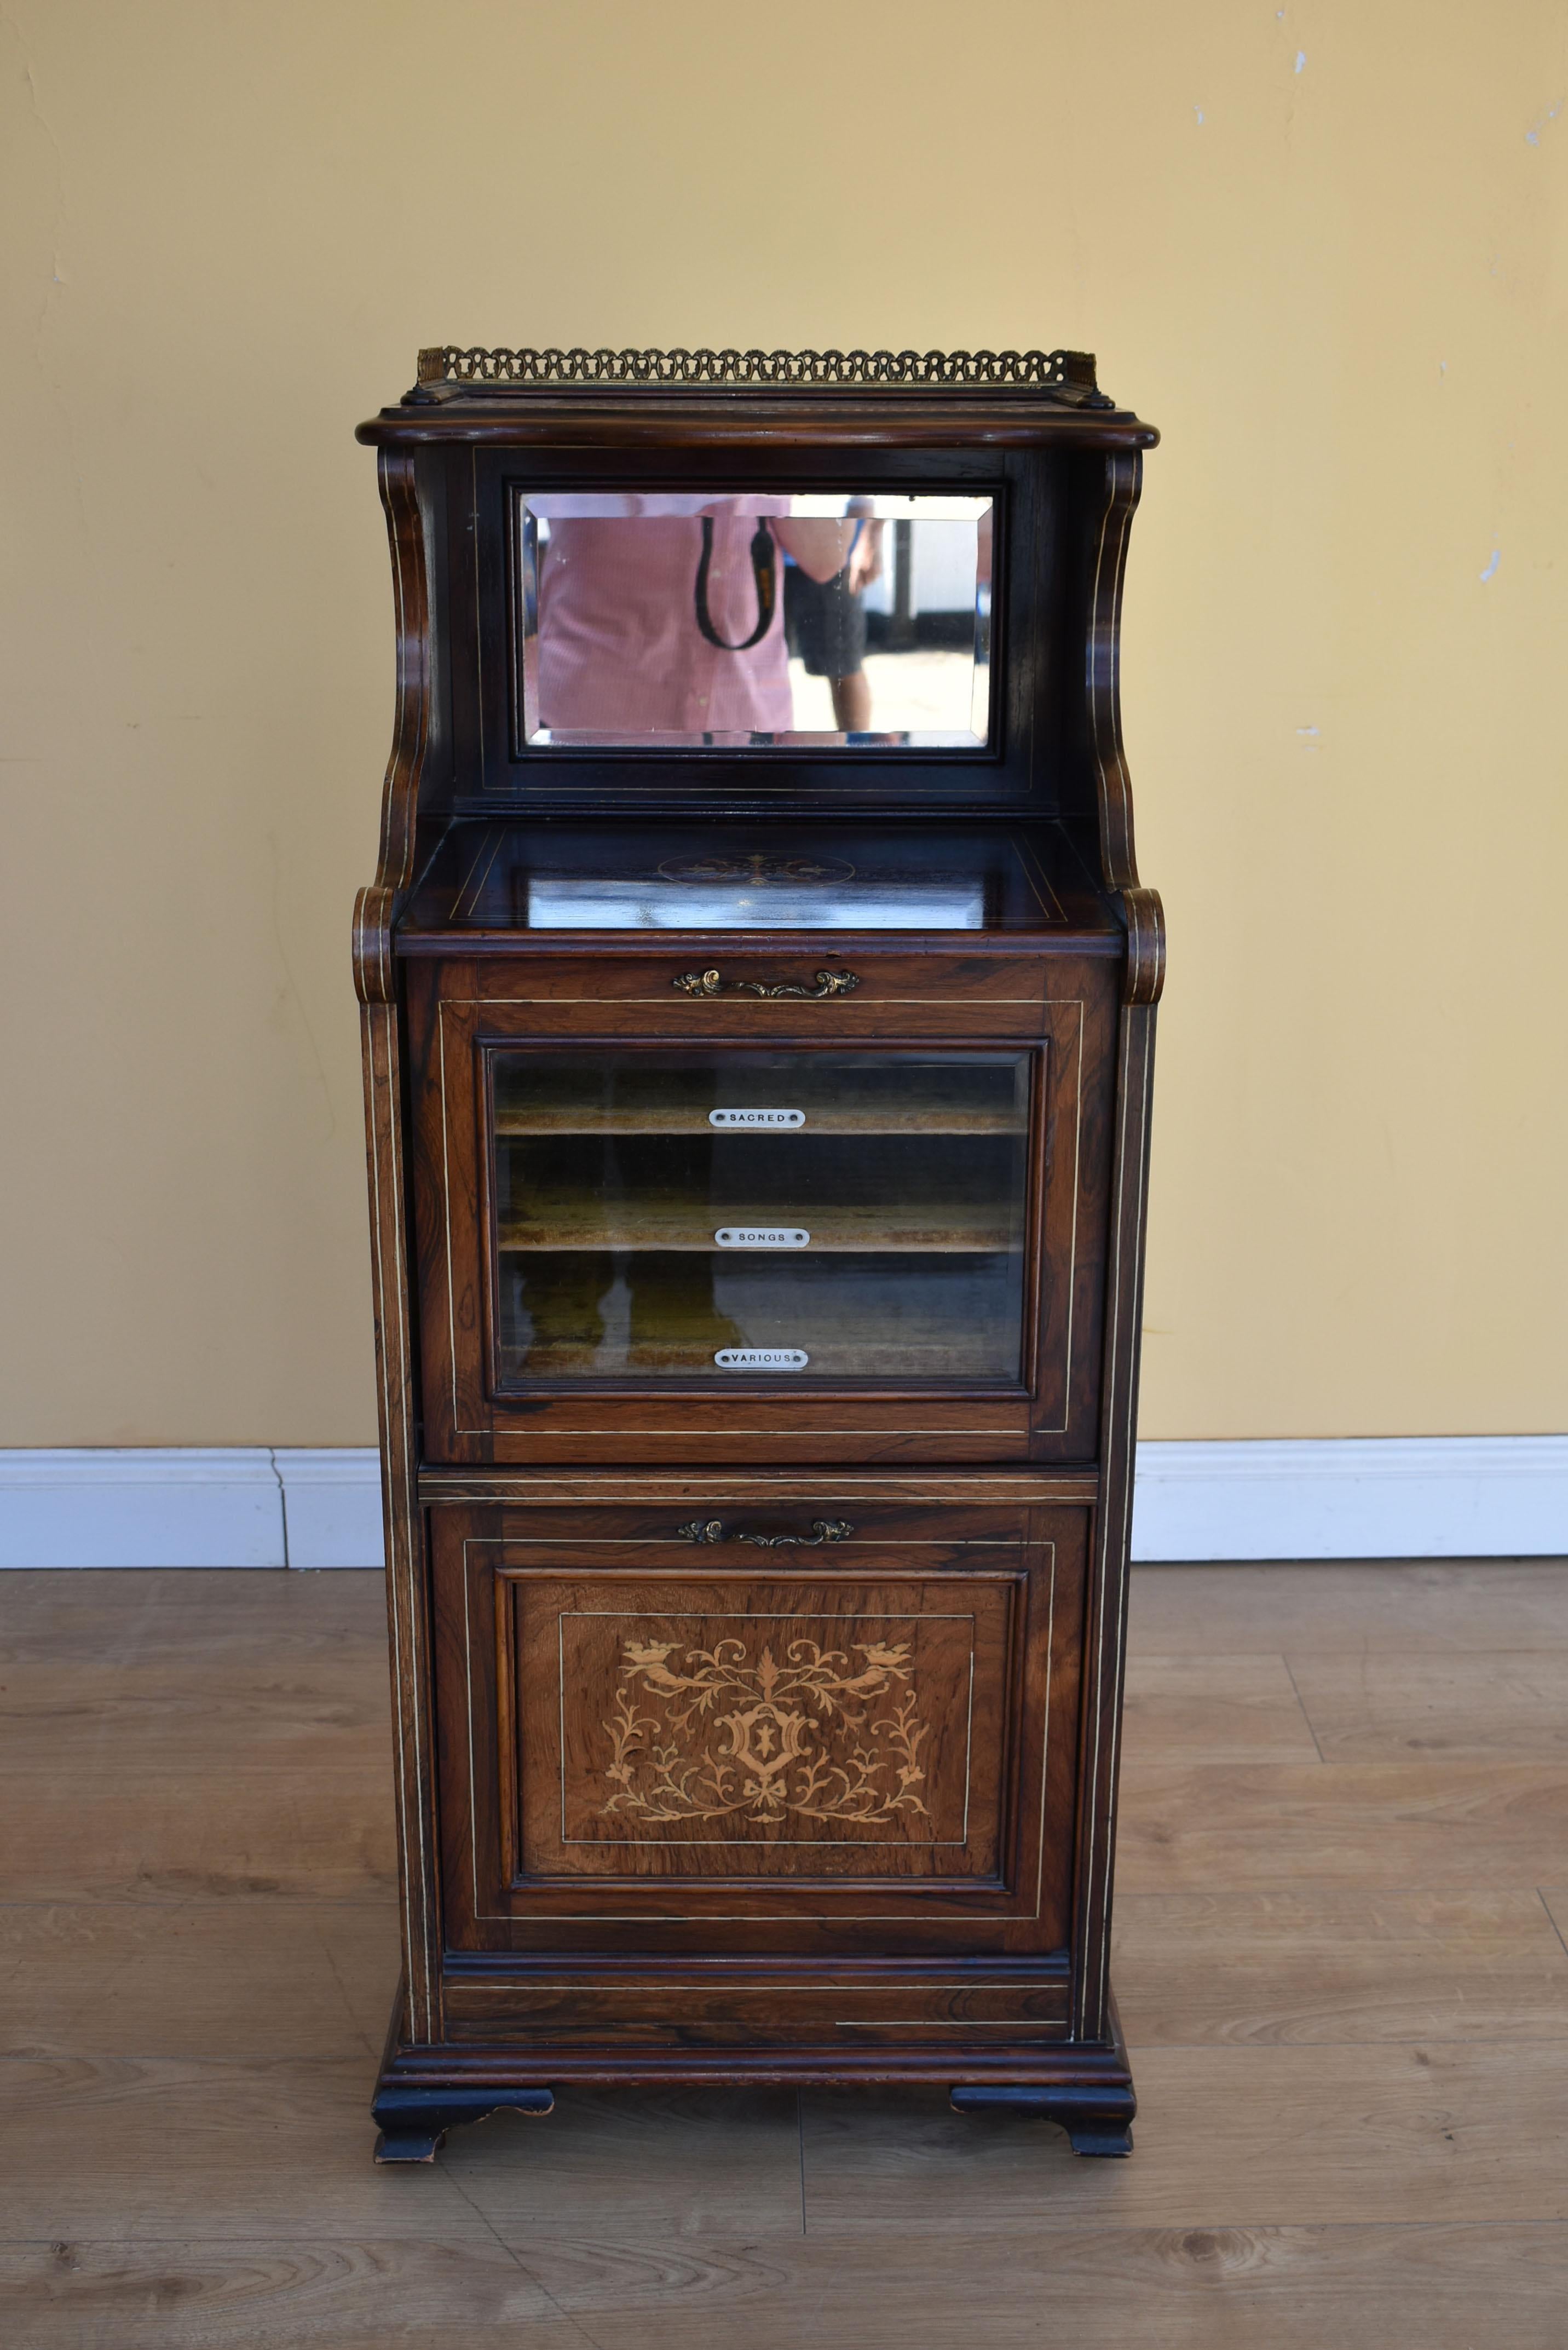 For sale is a good quality Edwardian rosewood and boxwood line inlaid music cabinet, with a brass gallery and mirror back, having a glazed fall front below, enclosing fabric lined shelves, labelled, sacred, song, various. Below this is a further